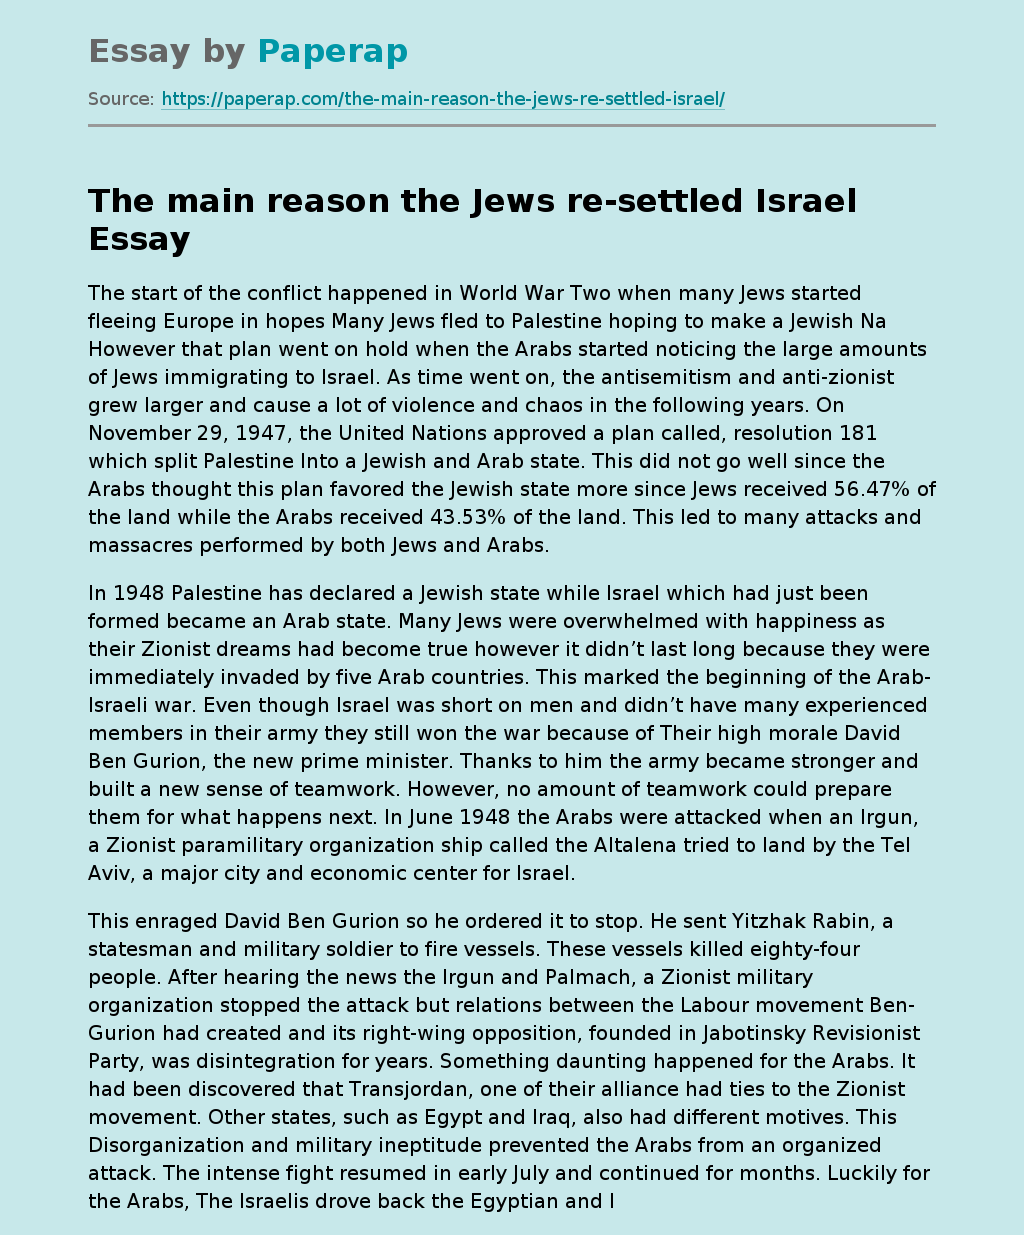 The main reason the Jews re-settled Israel